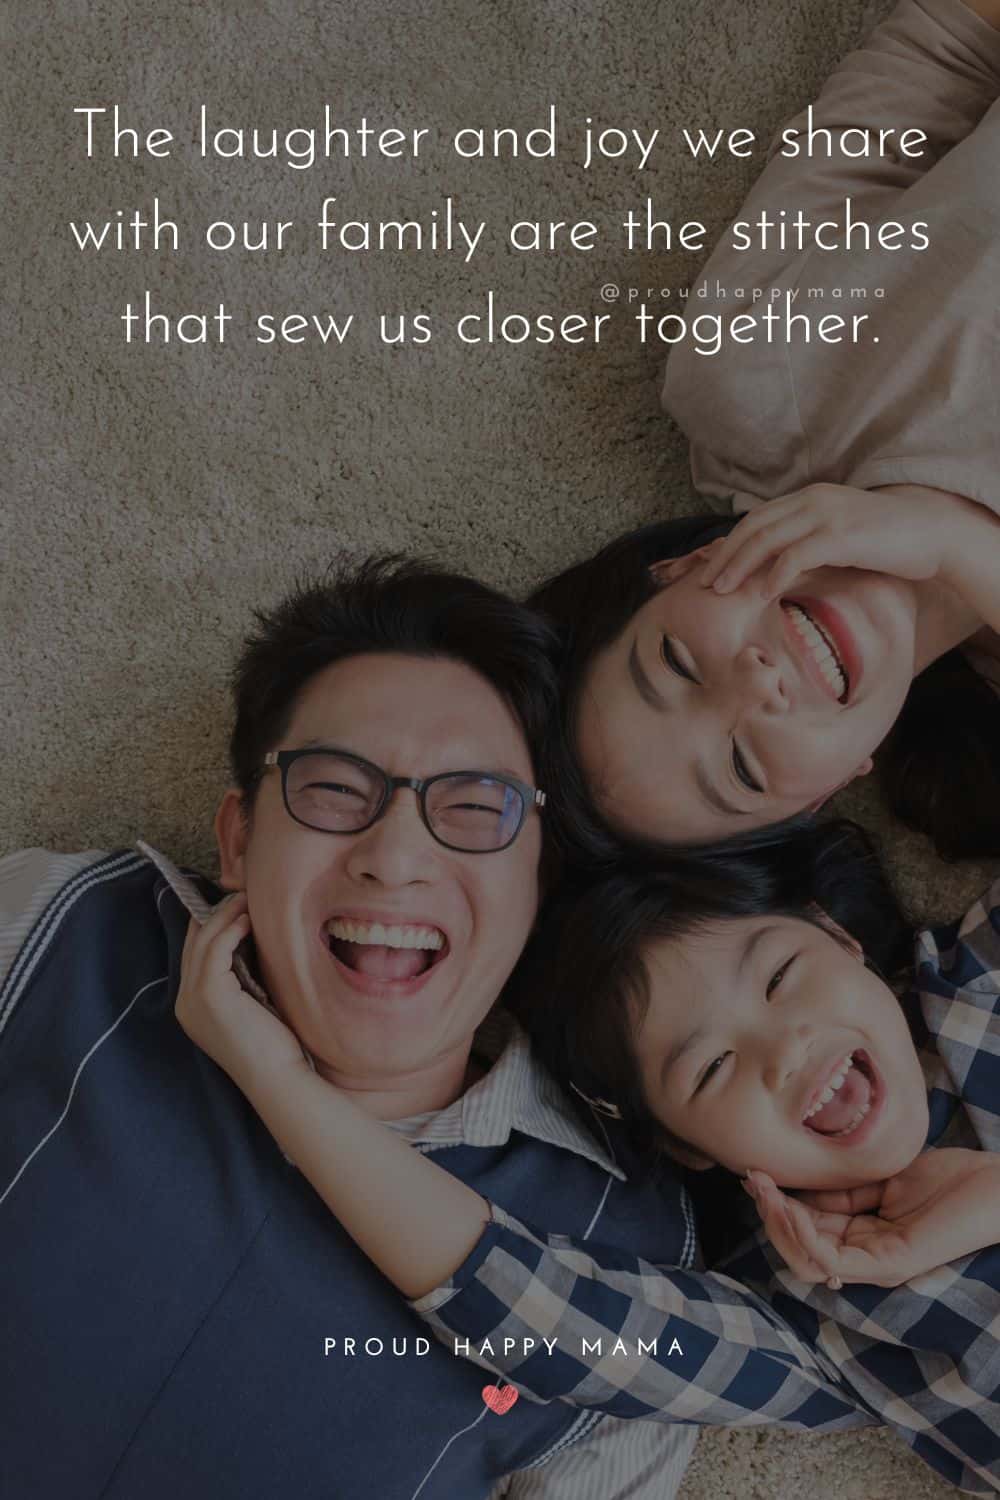 time with family quotes - The laughter and joy we share with our family are the stitches that sew us closer together.